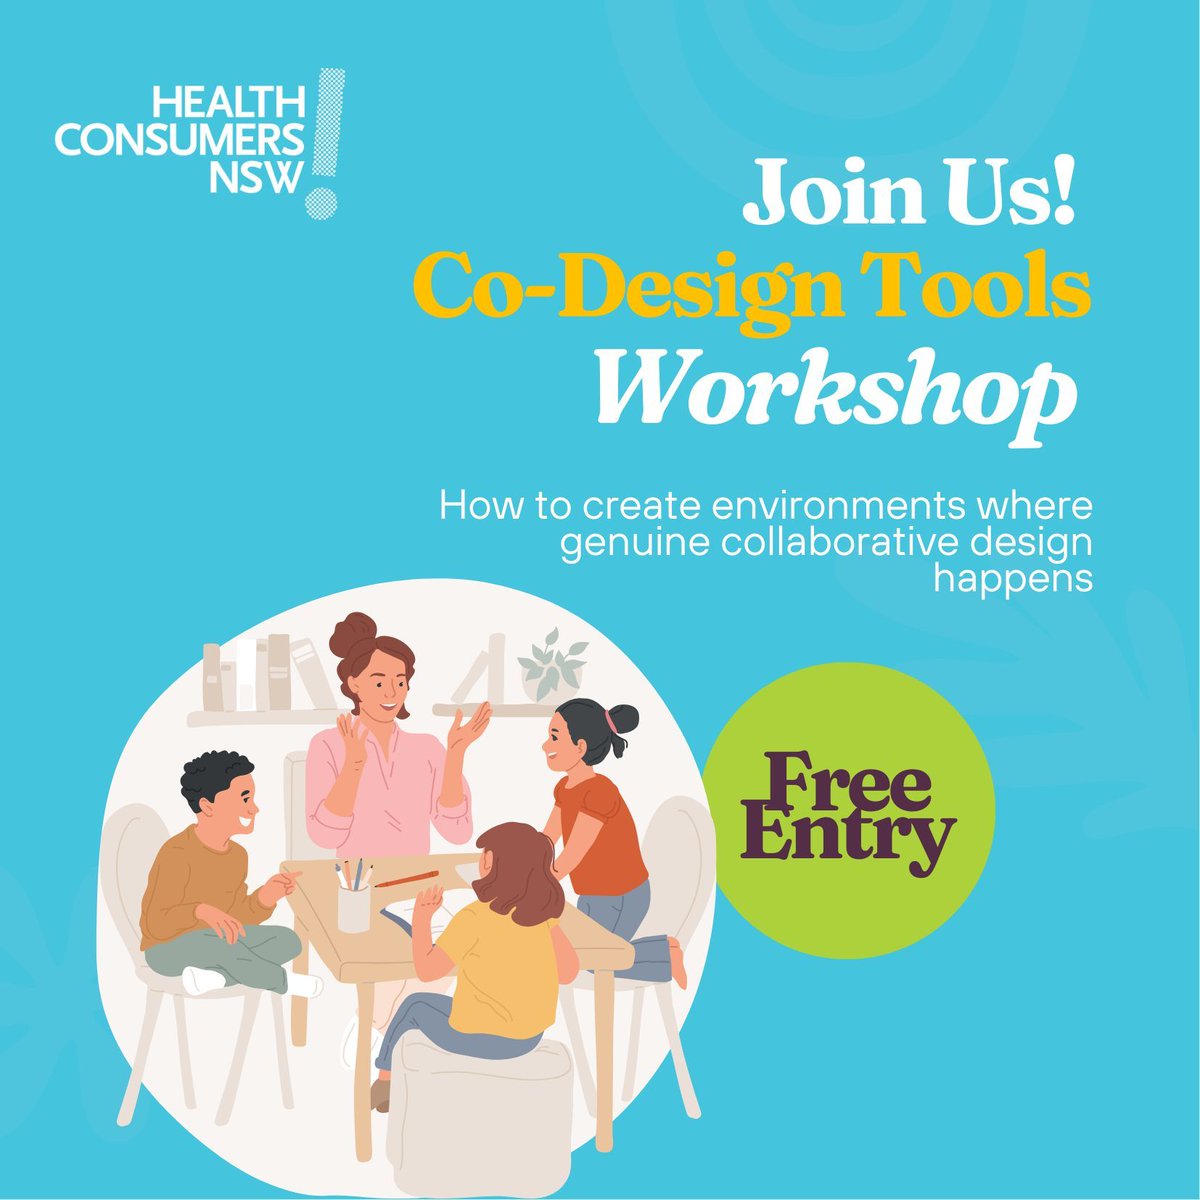 Have you started working with health consumers to co-design services? Are you in Sydney? Then come to our workshop. Free registrations now. buff.ly/3VgMyv5 #healthconsumer #codesign